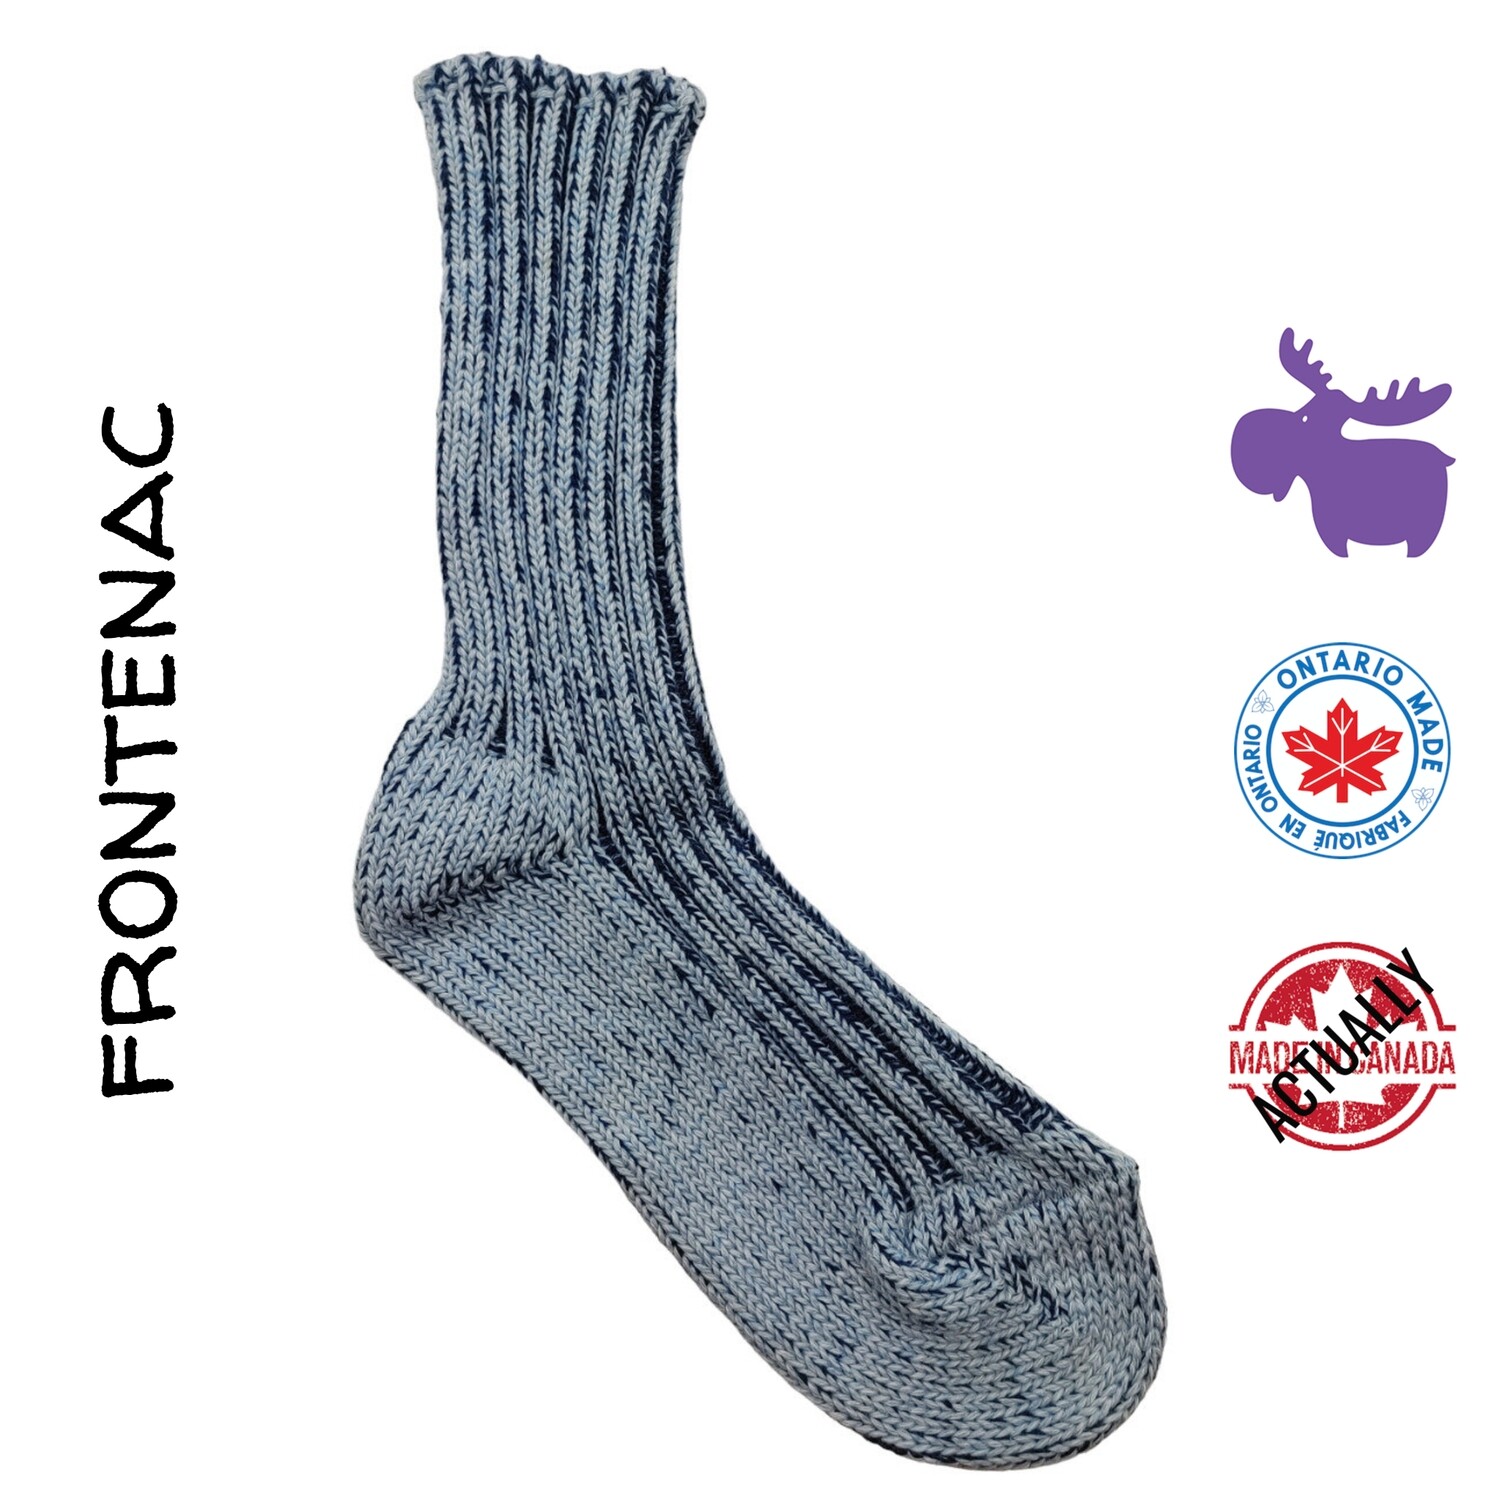 Frontenac Cotton/Wool Boot Sock in Quail Egg Blue | One Size Fits Most | Actually Made in Canada by Purple Moose